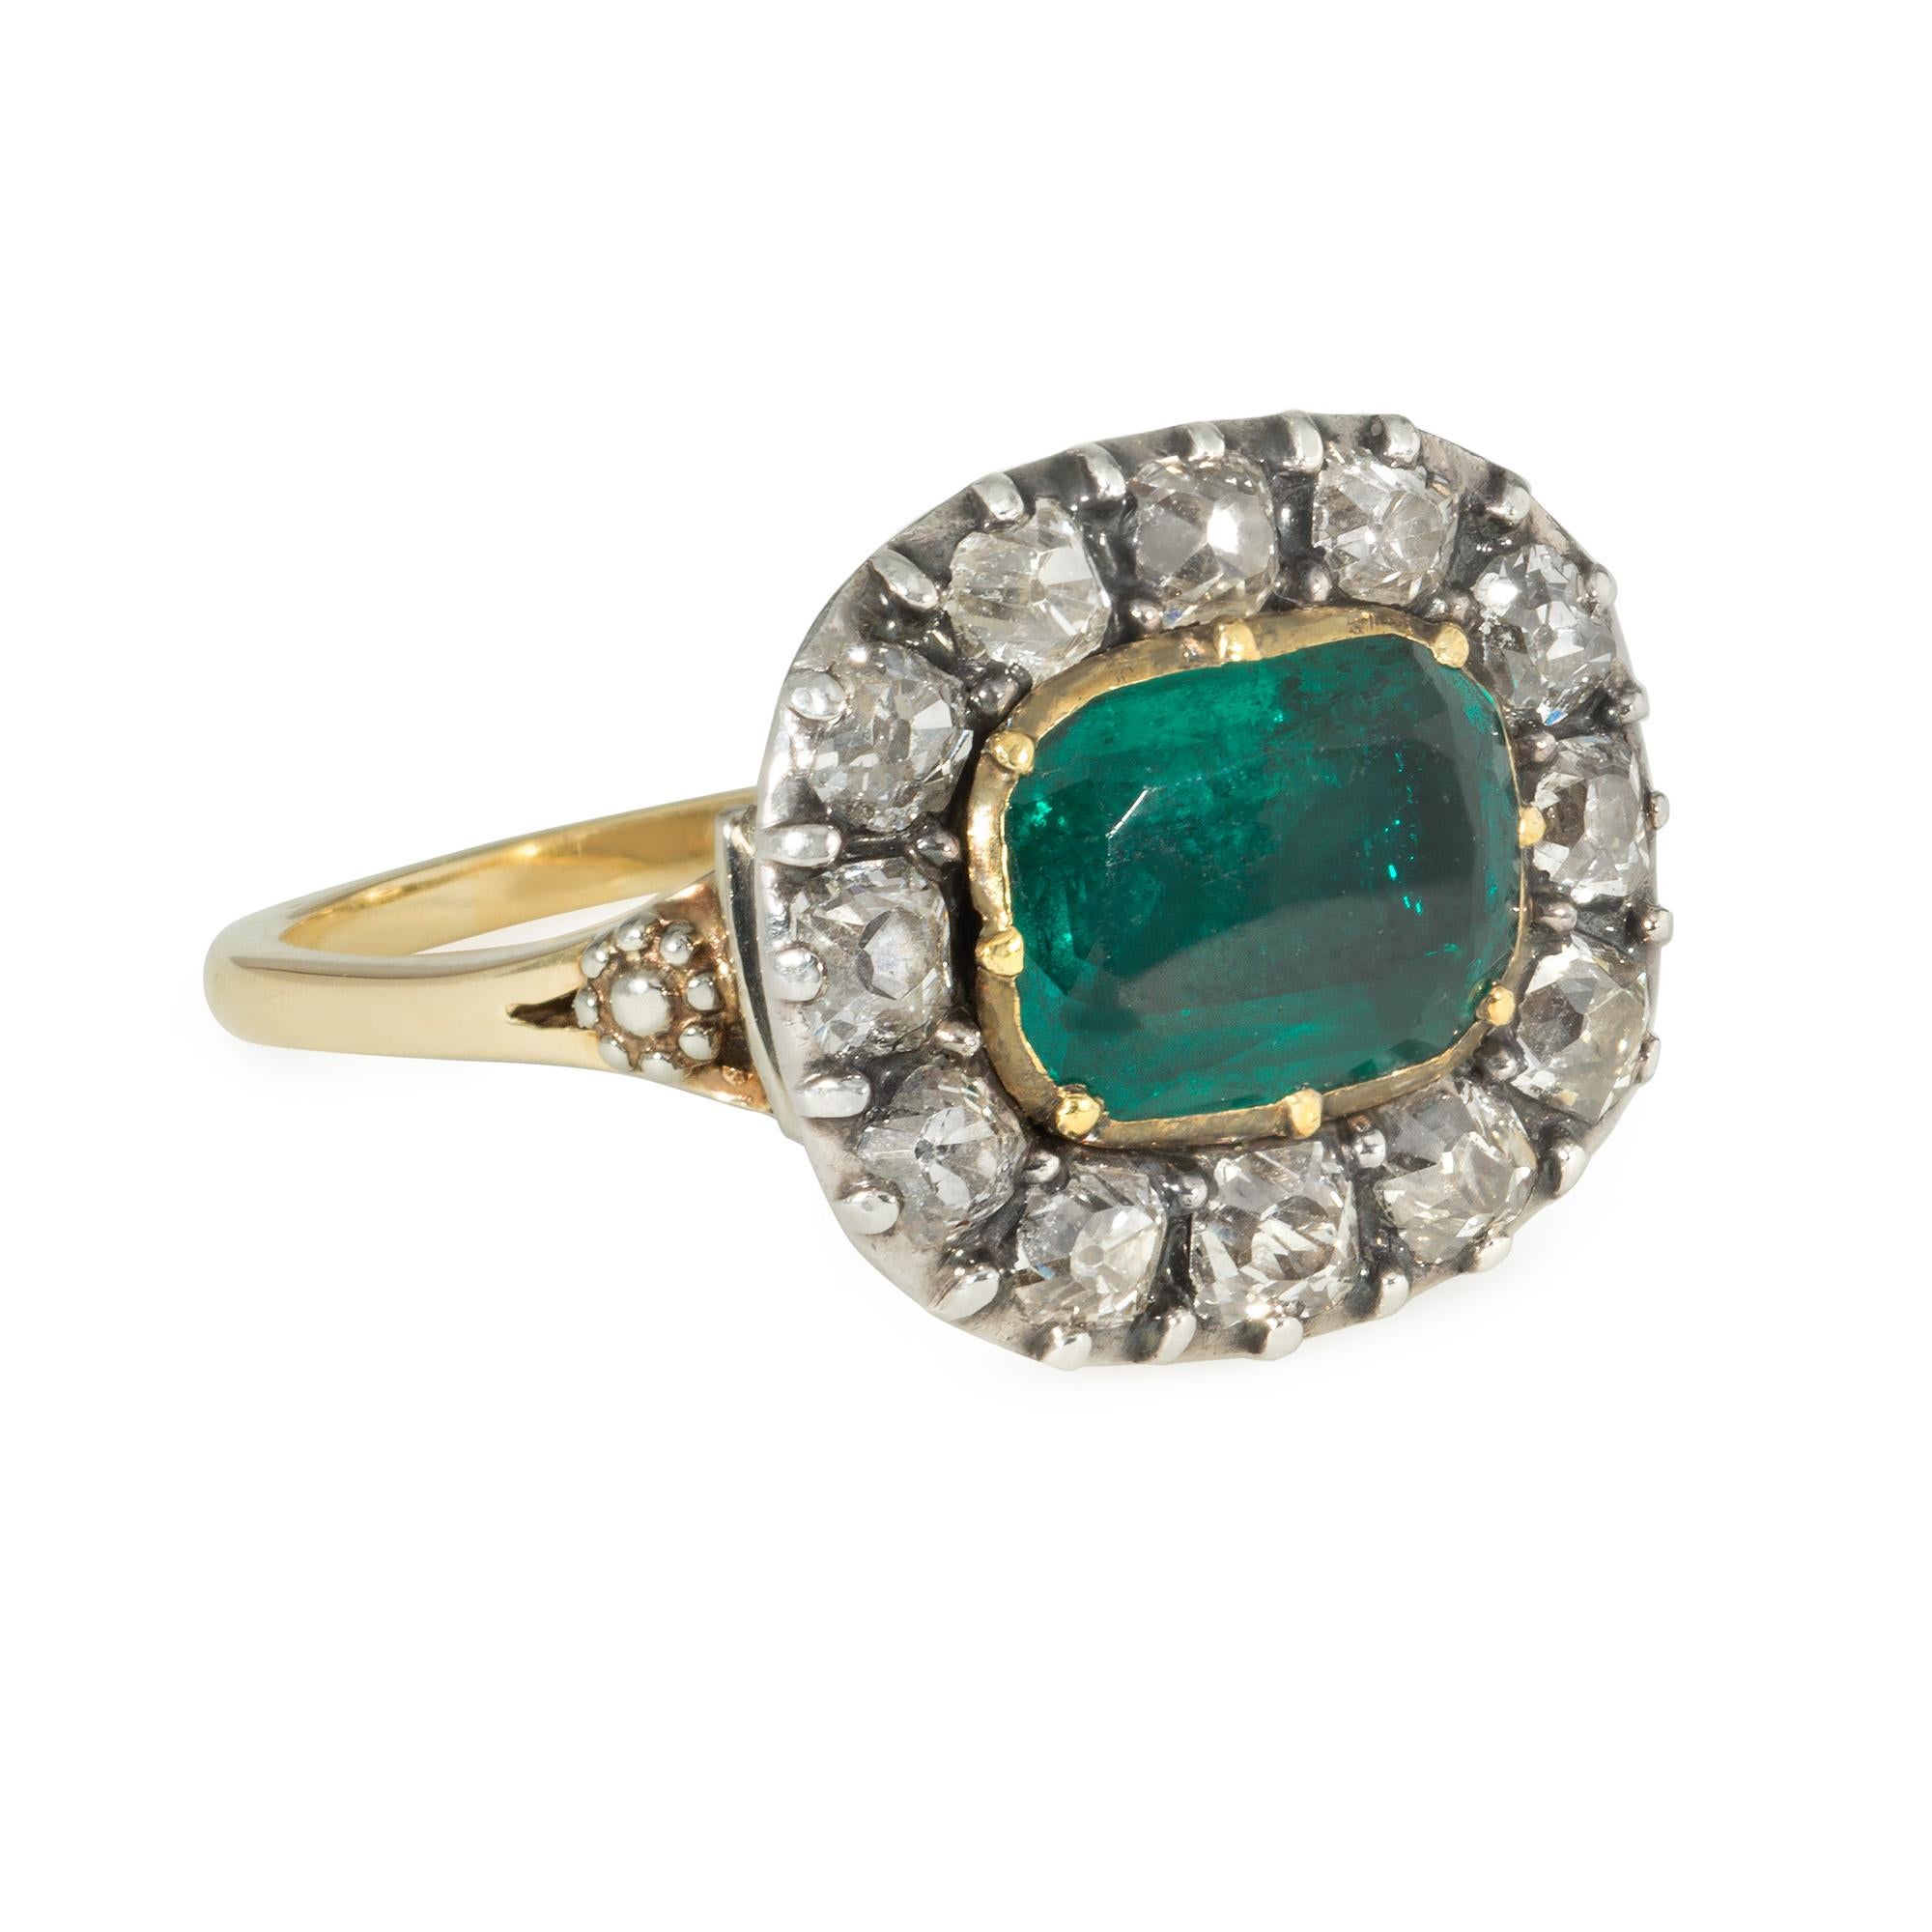 An antique Georgian period old mine cut diamond and emerald cluster ring, in sterling silver and 18k gold closed back mount with silver cluster motifs on the shoulders. Later reshanking.  Atw old mine cut diamonds 0.66 ct., emerald measures